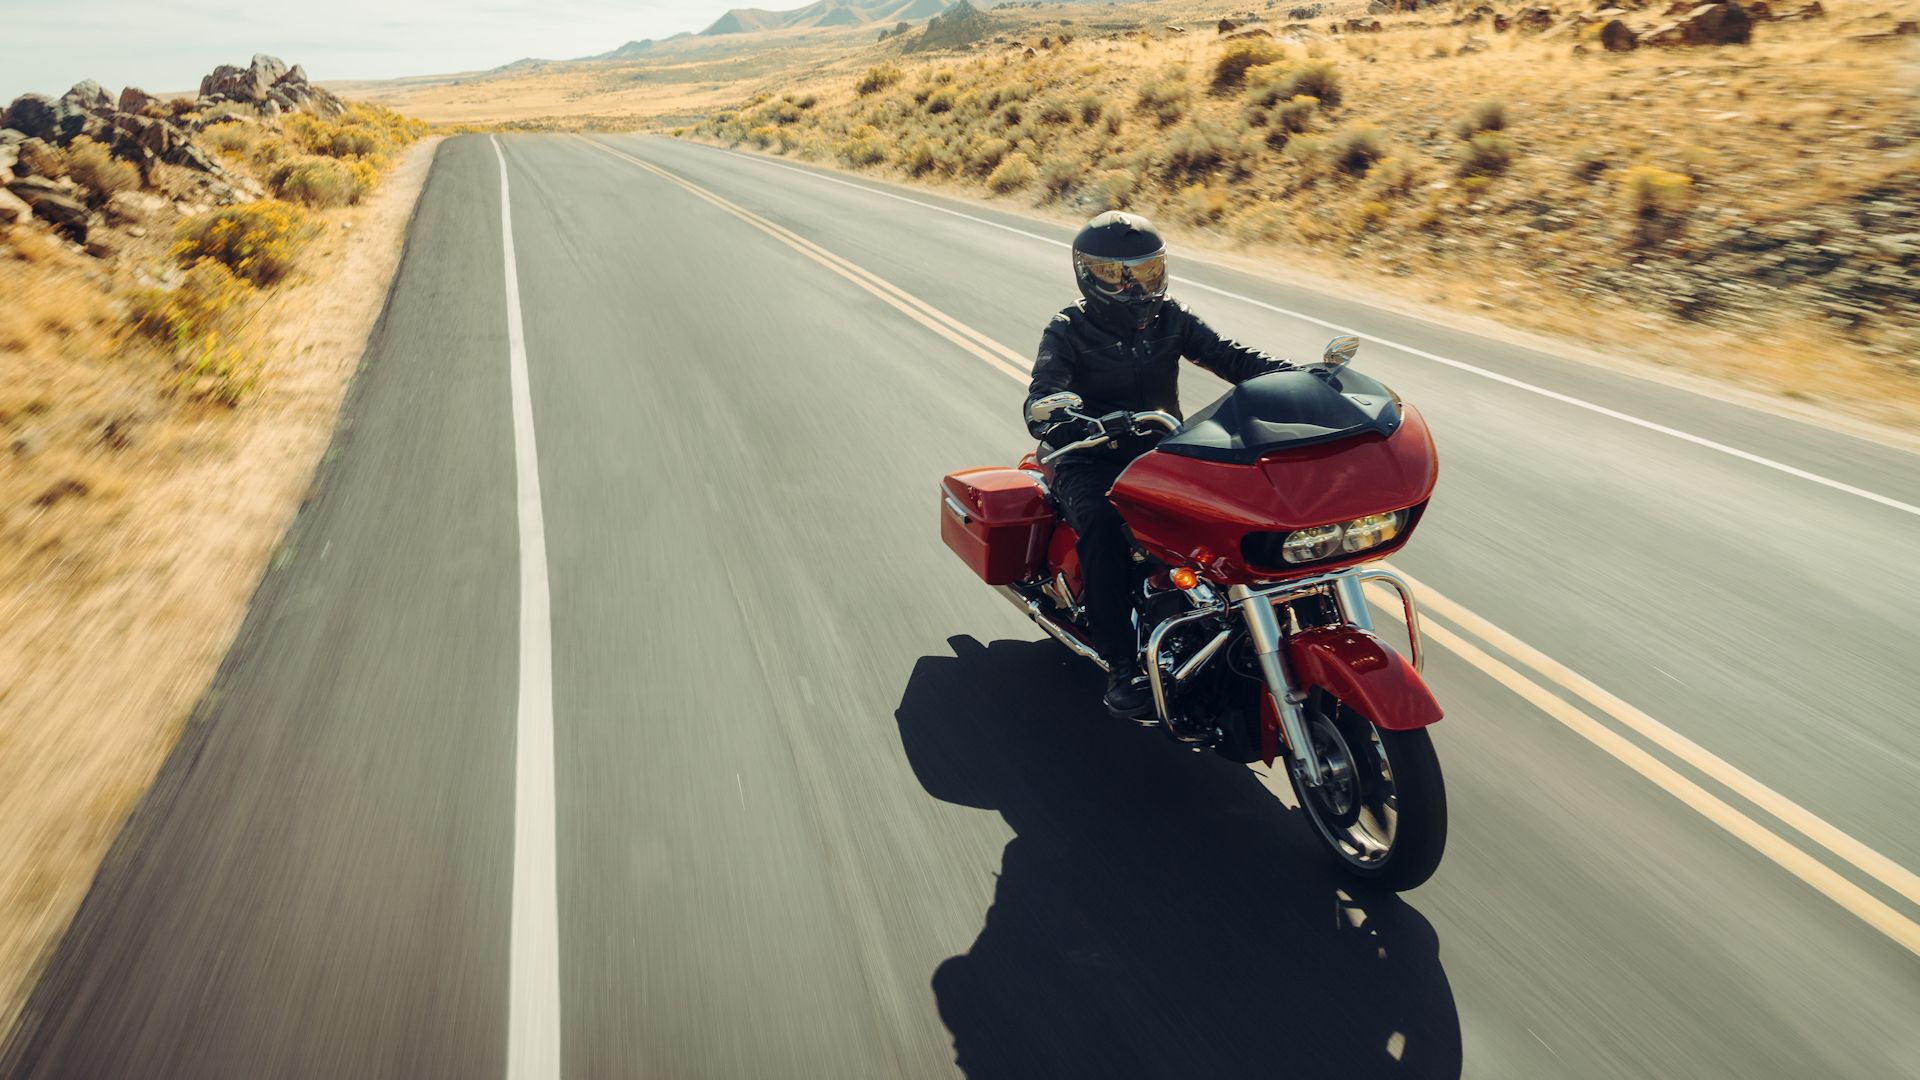 Red 2023 Harley-Davidson Road Glide cruising on the highway